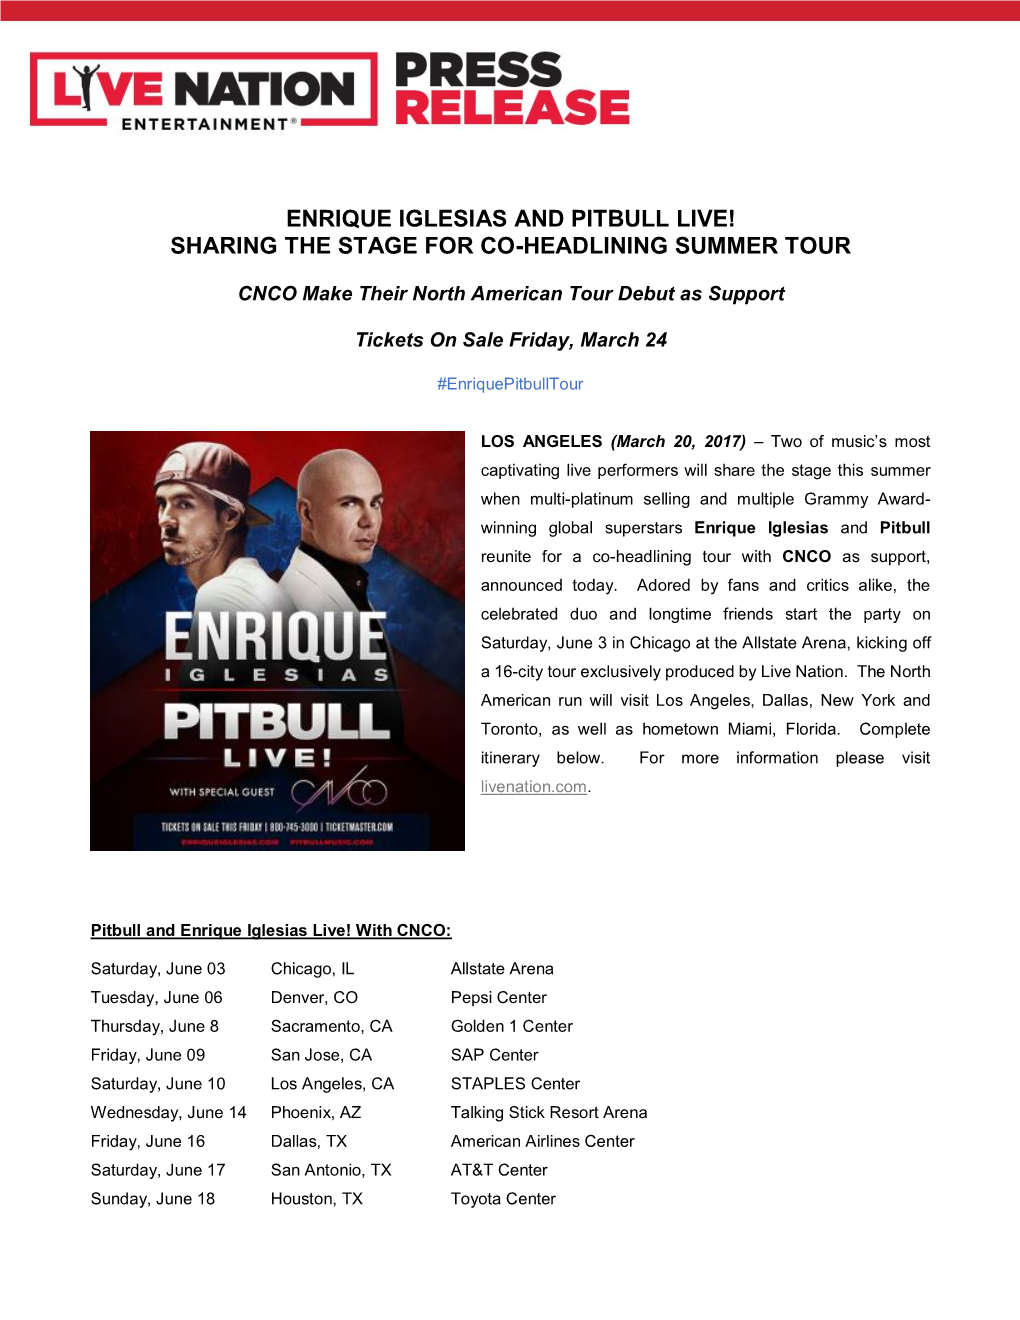 Enrique Iglesias and Pitbull Live! Sharing the Stage for Co-Headlining Summer Tour